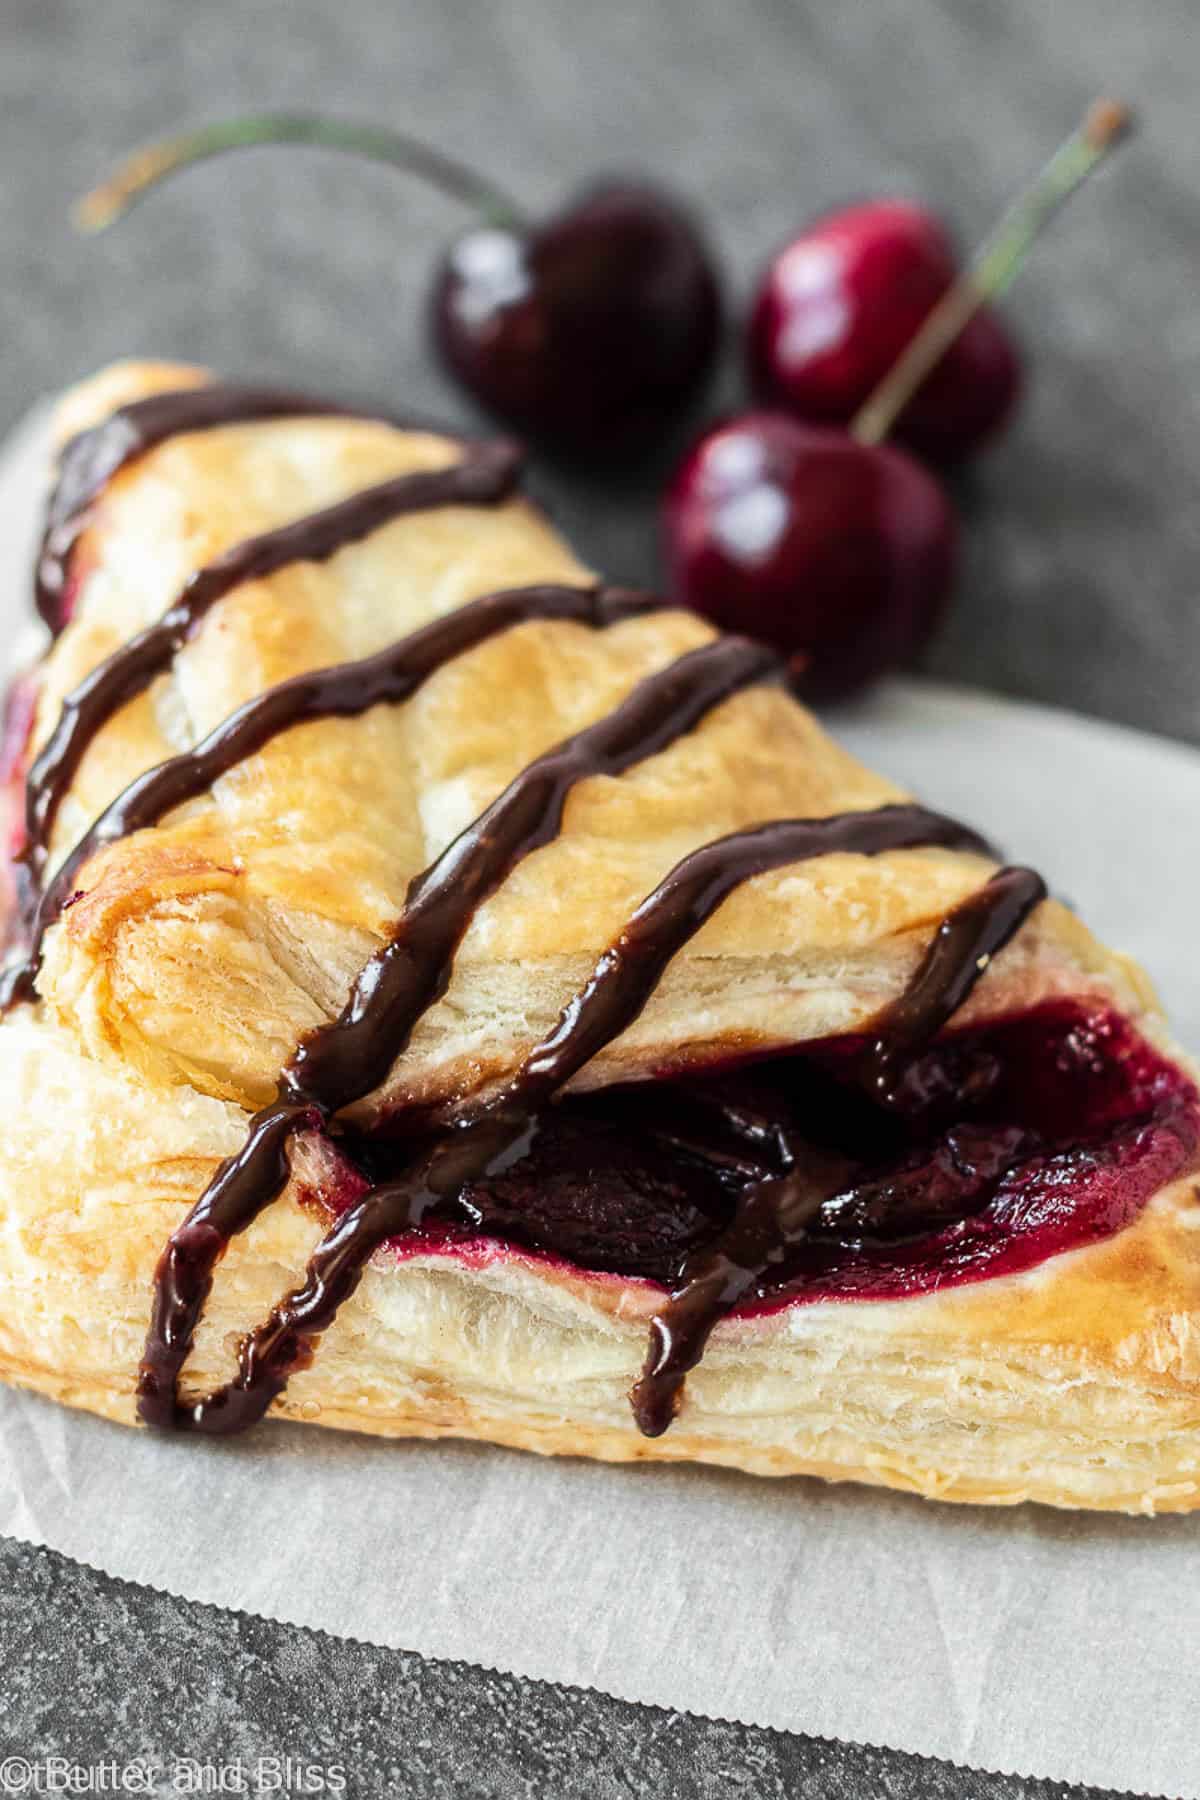 Cherry puff pastry turnover with chocolate drizzle on a napkin